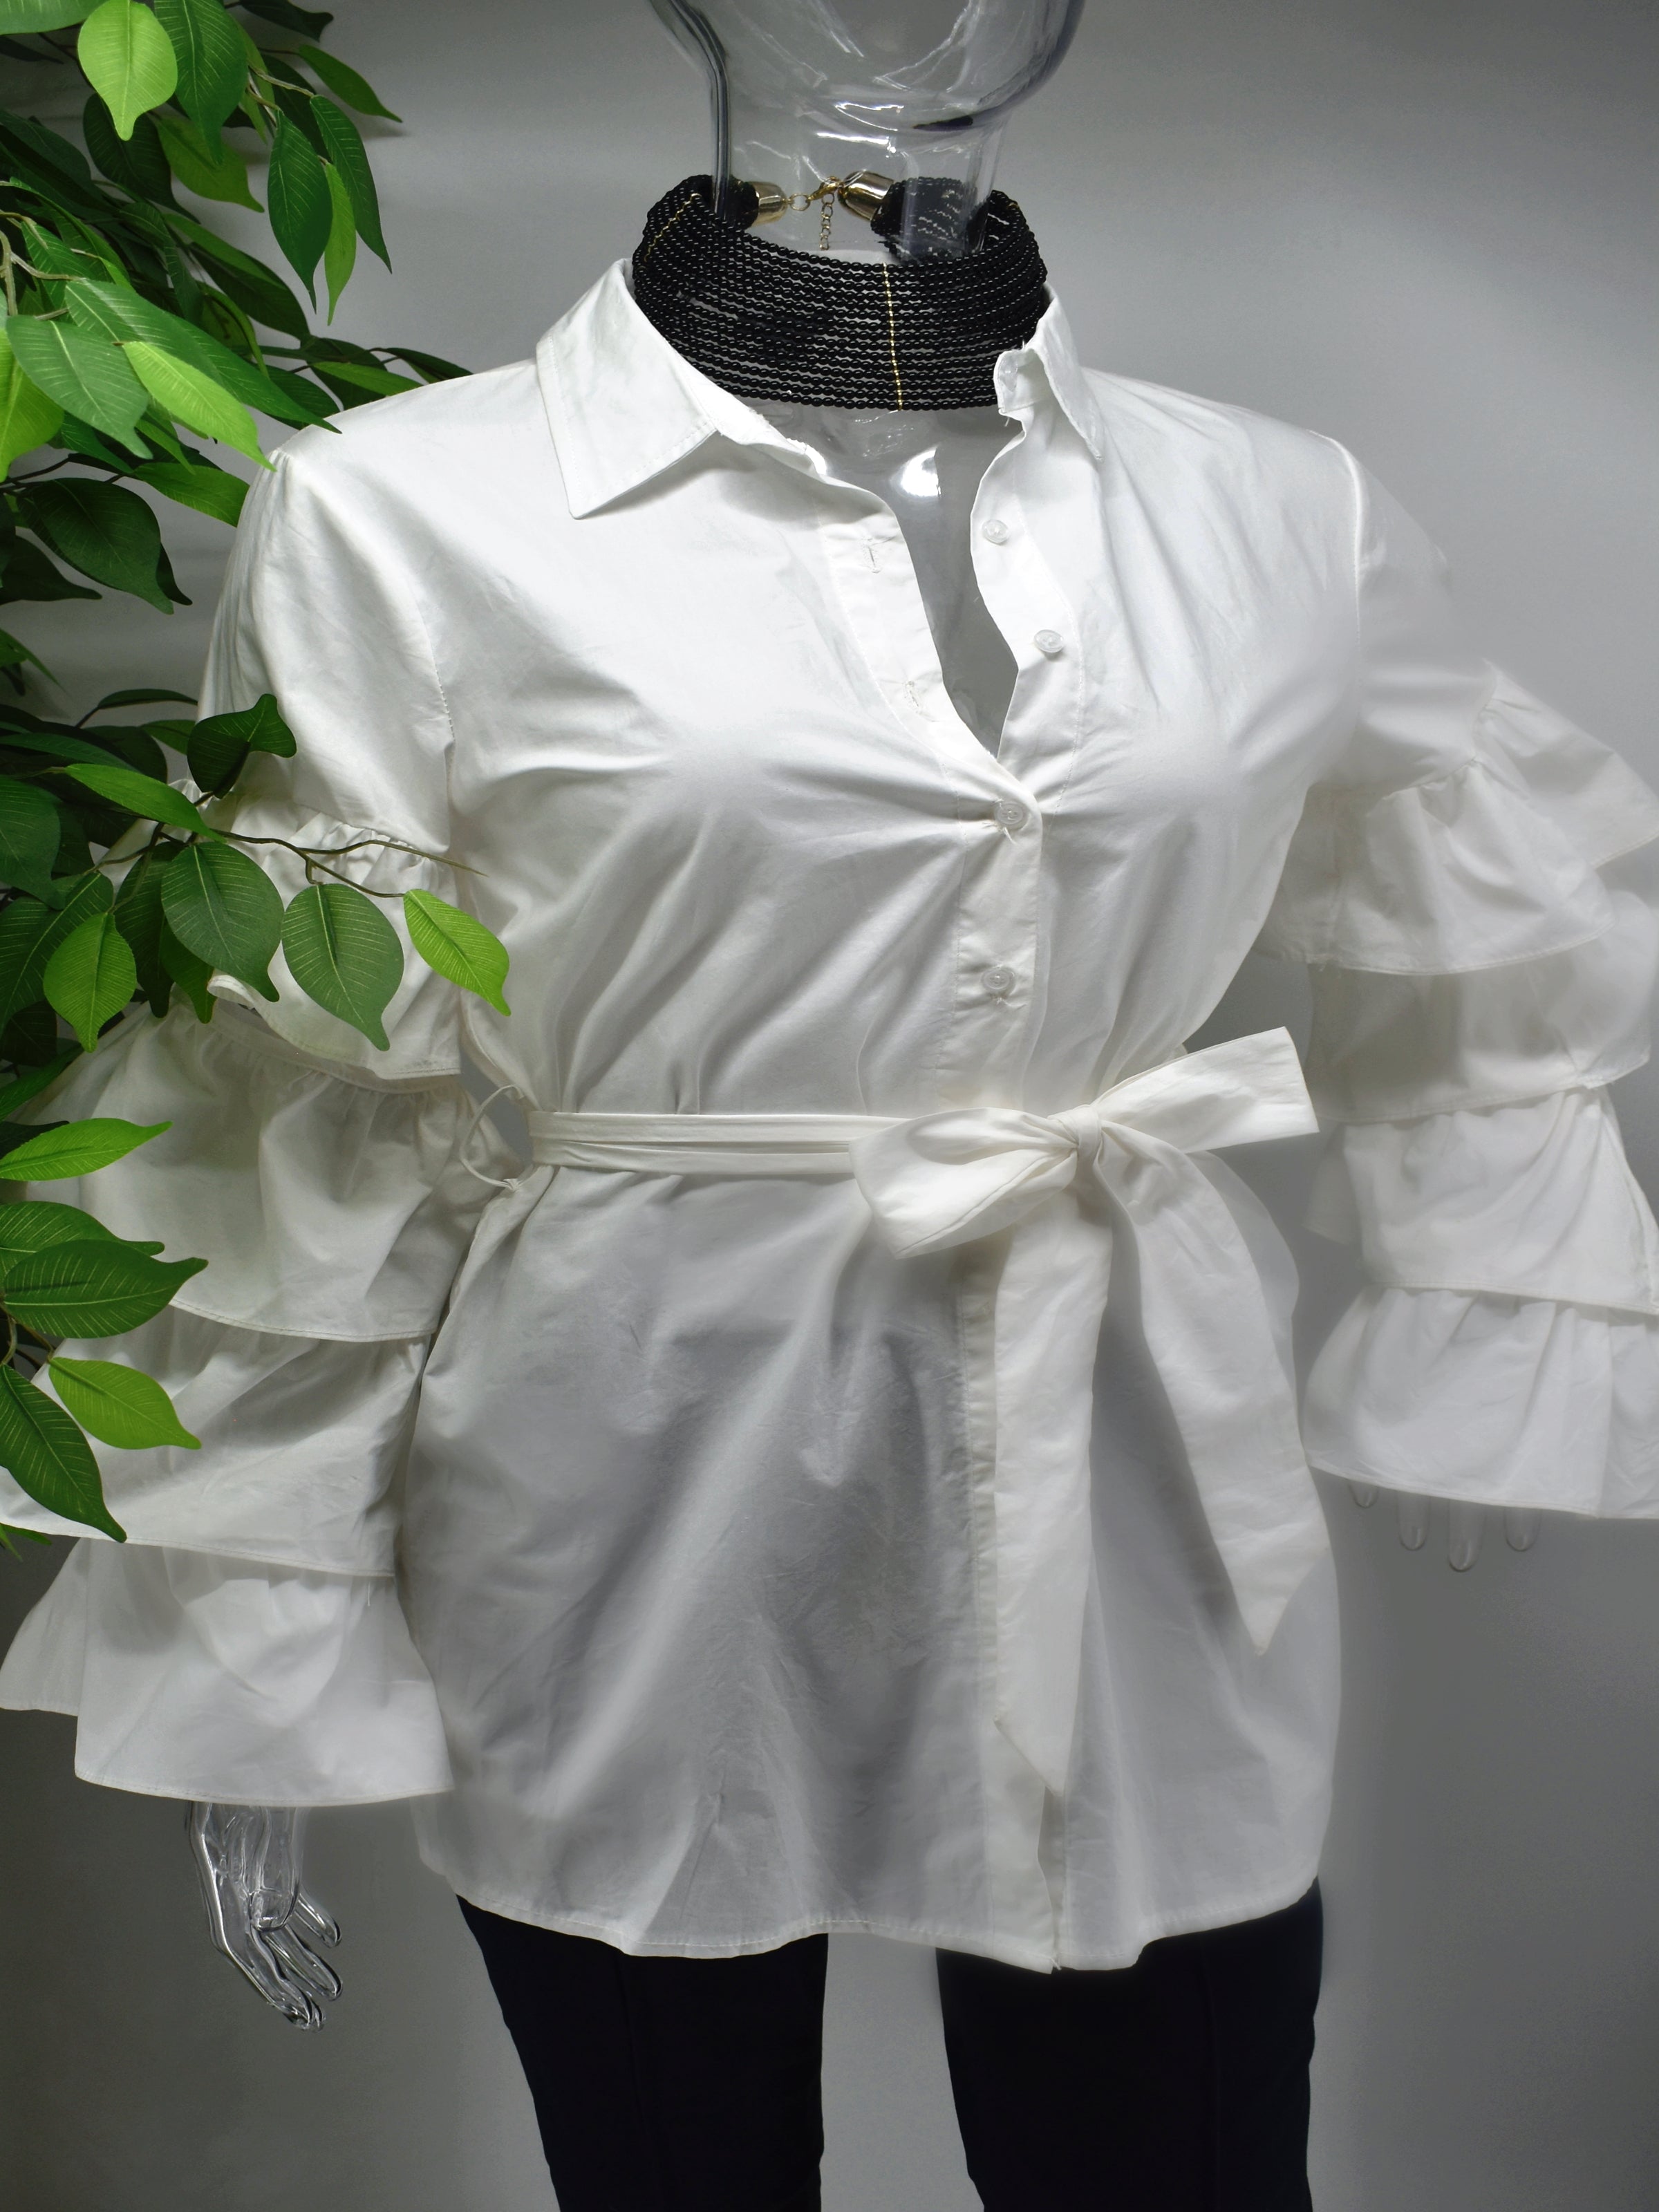 Turn heads and represent how fashionably fierce you are in our Brandis White ruffle sleeve shirt top.  Our Brandis is a long button front shirt top with a traditional collar and a romantic bold four tiered ruffle sleeve.